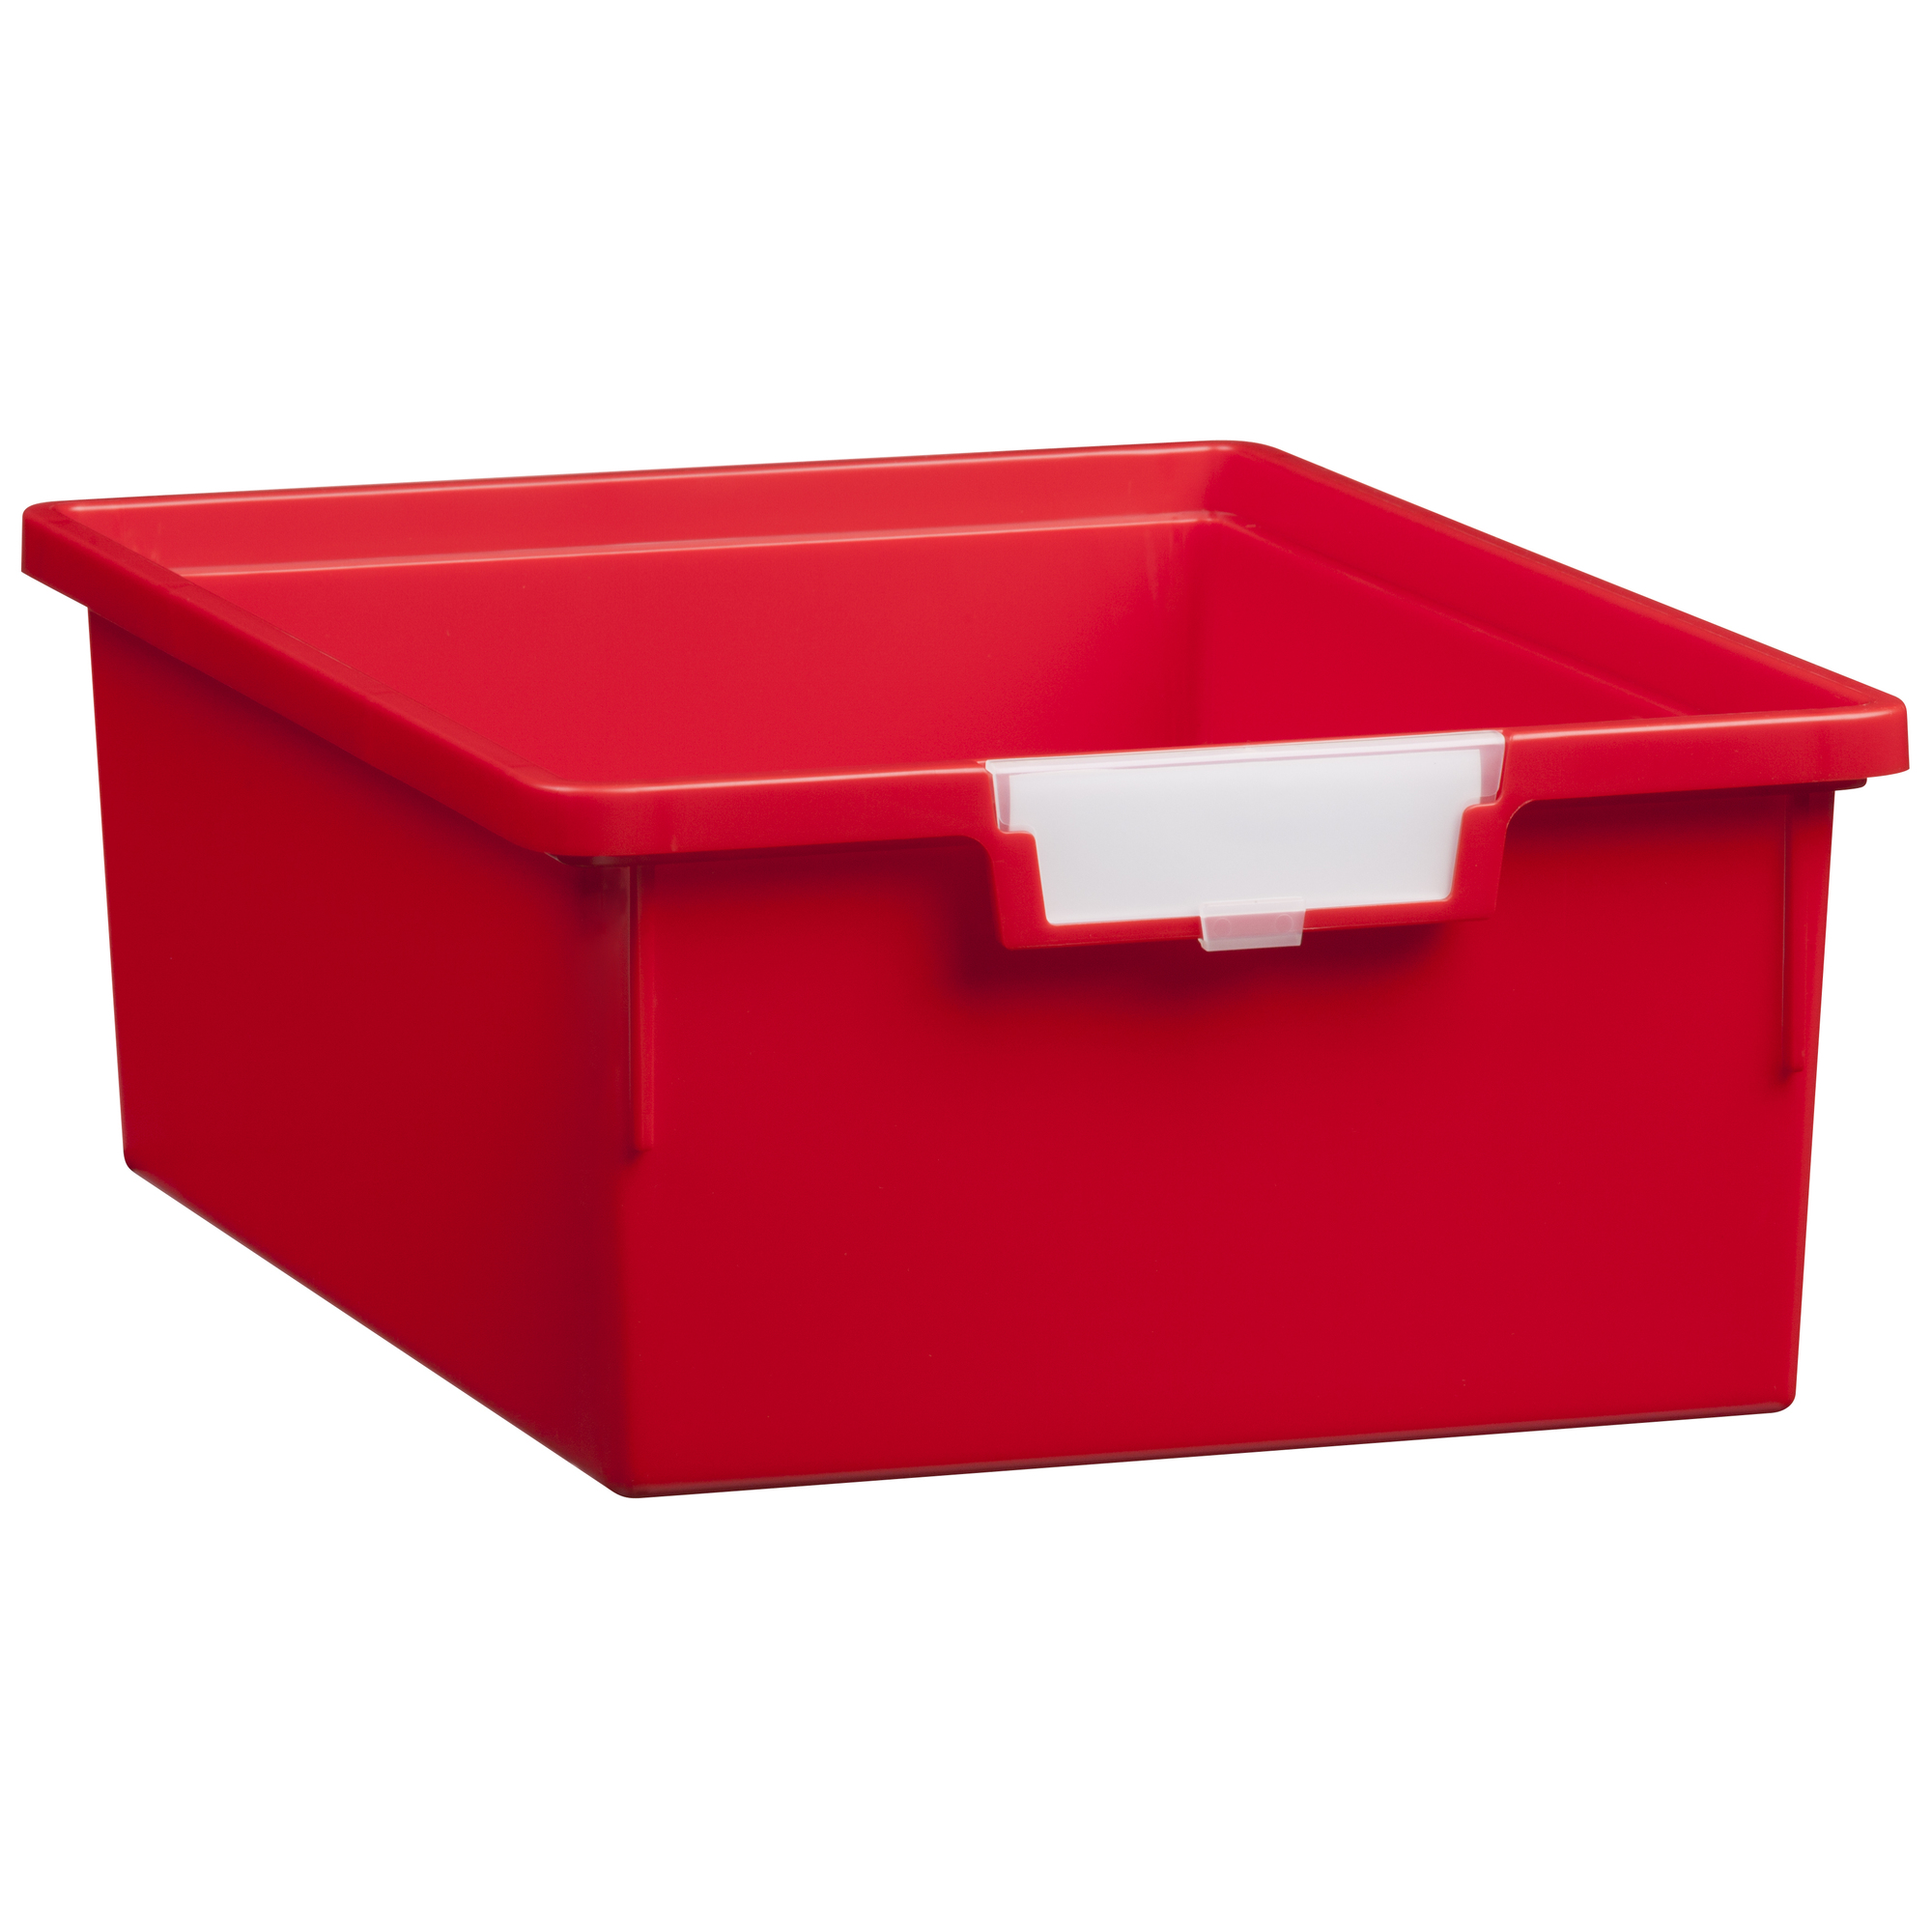 Certwood StorWerks, Slim Line 6Inch Tray in Primary Red-3PK, Included (qty.) 3 Height 6 in, Model CE1952PR3